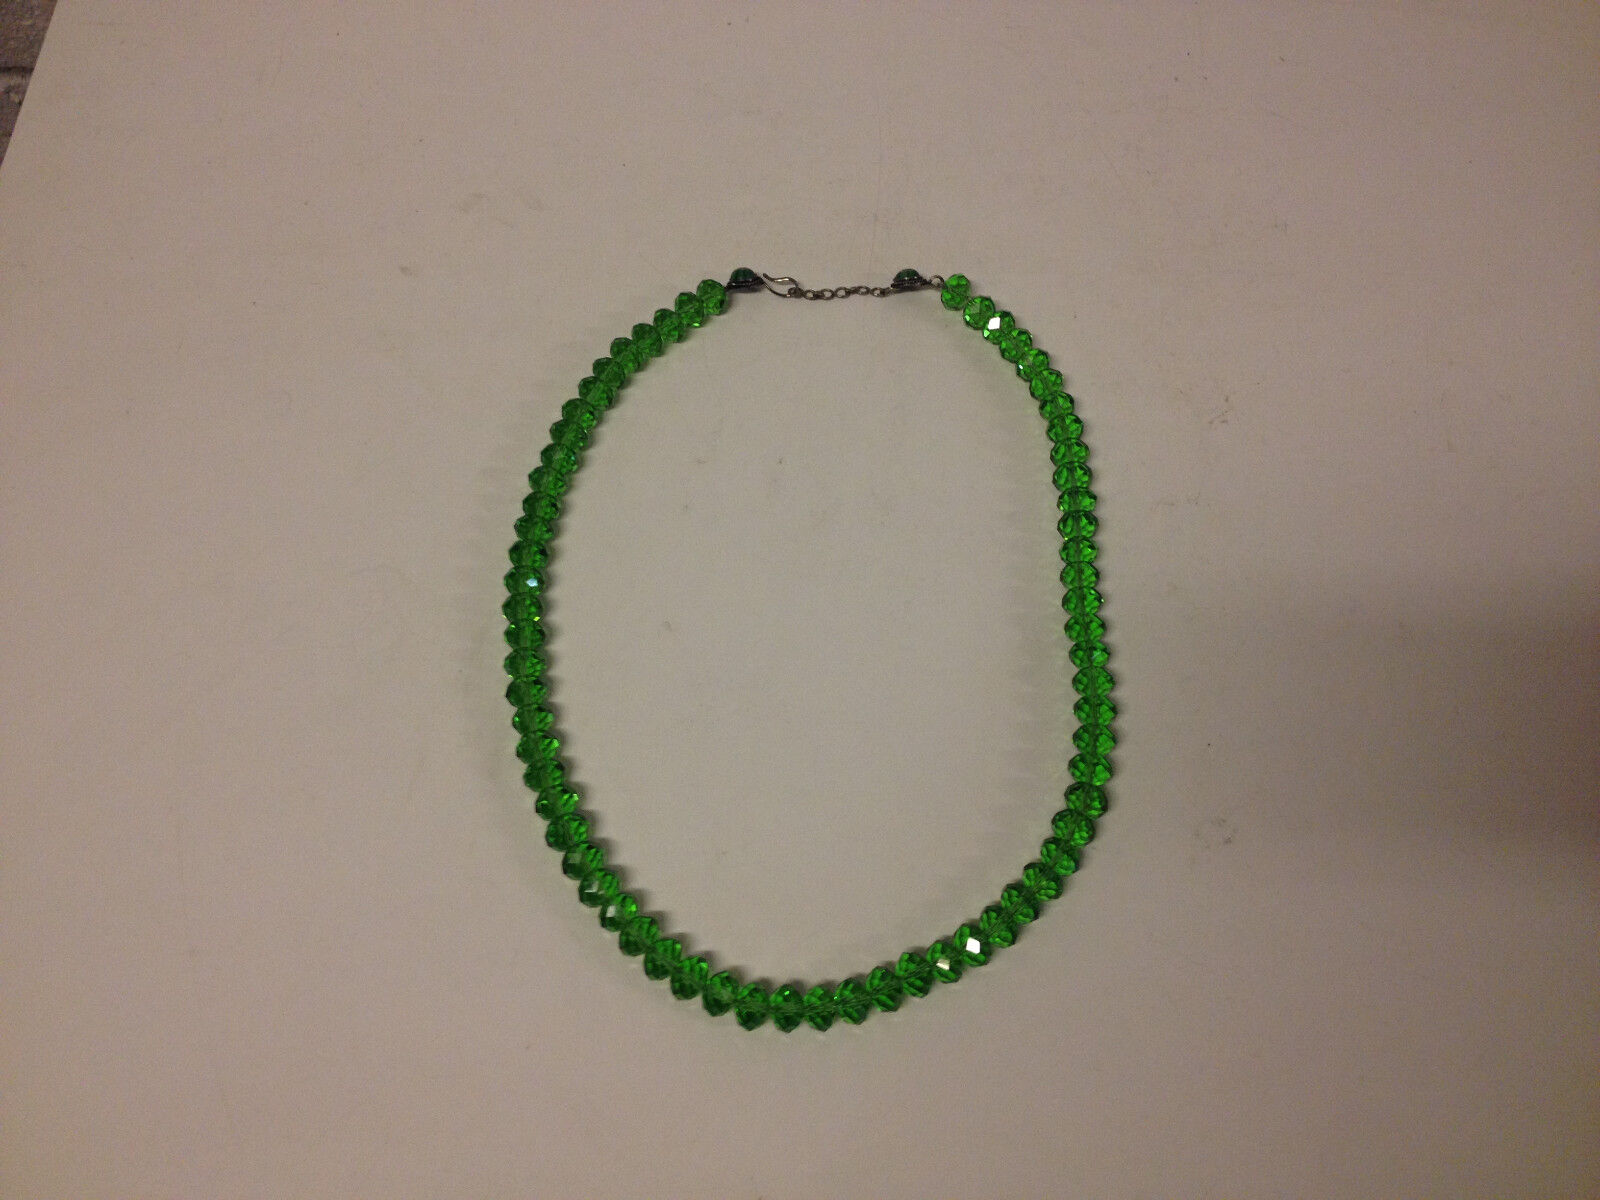 Vintage Austrian or German Lime Green Crystal Beaded Necklace w/ 2 Glass Beads